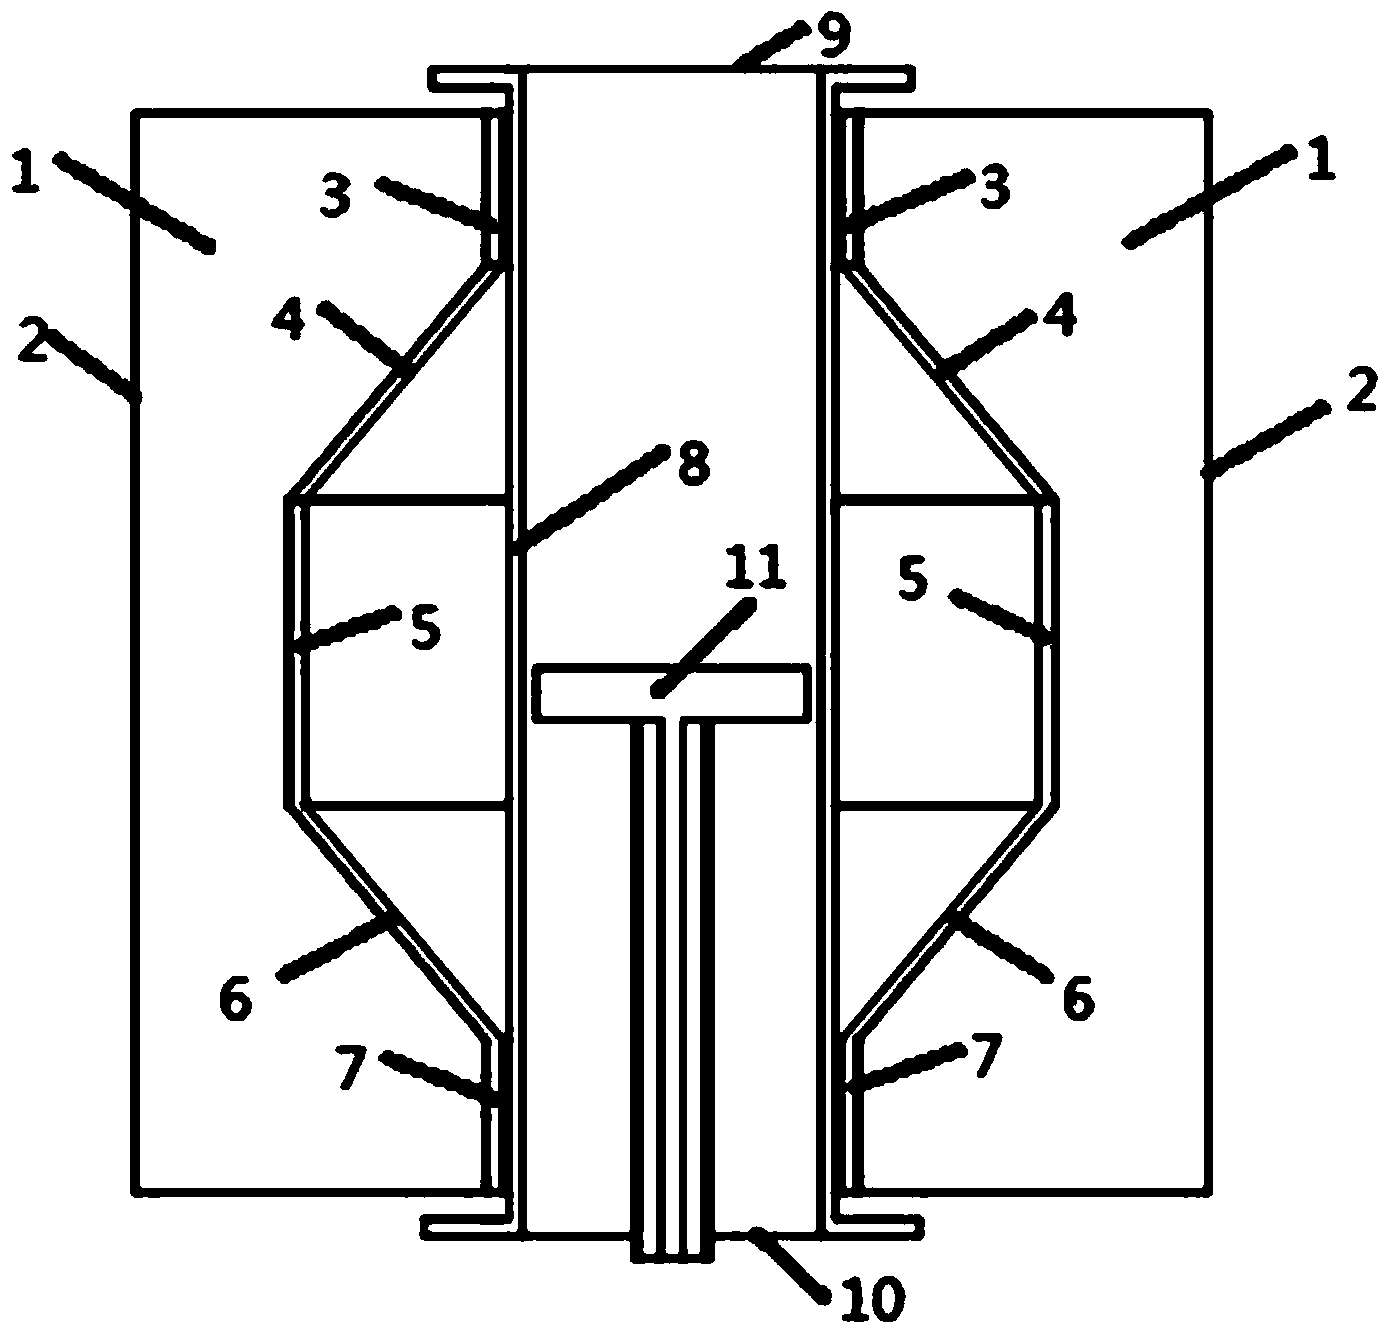 Heating device for hydride vapor phase epitaxy (HVPE) growth